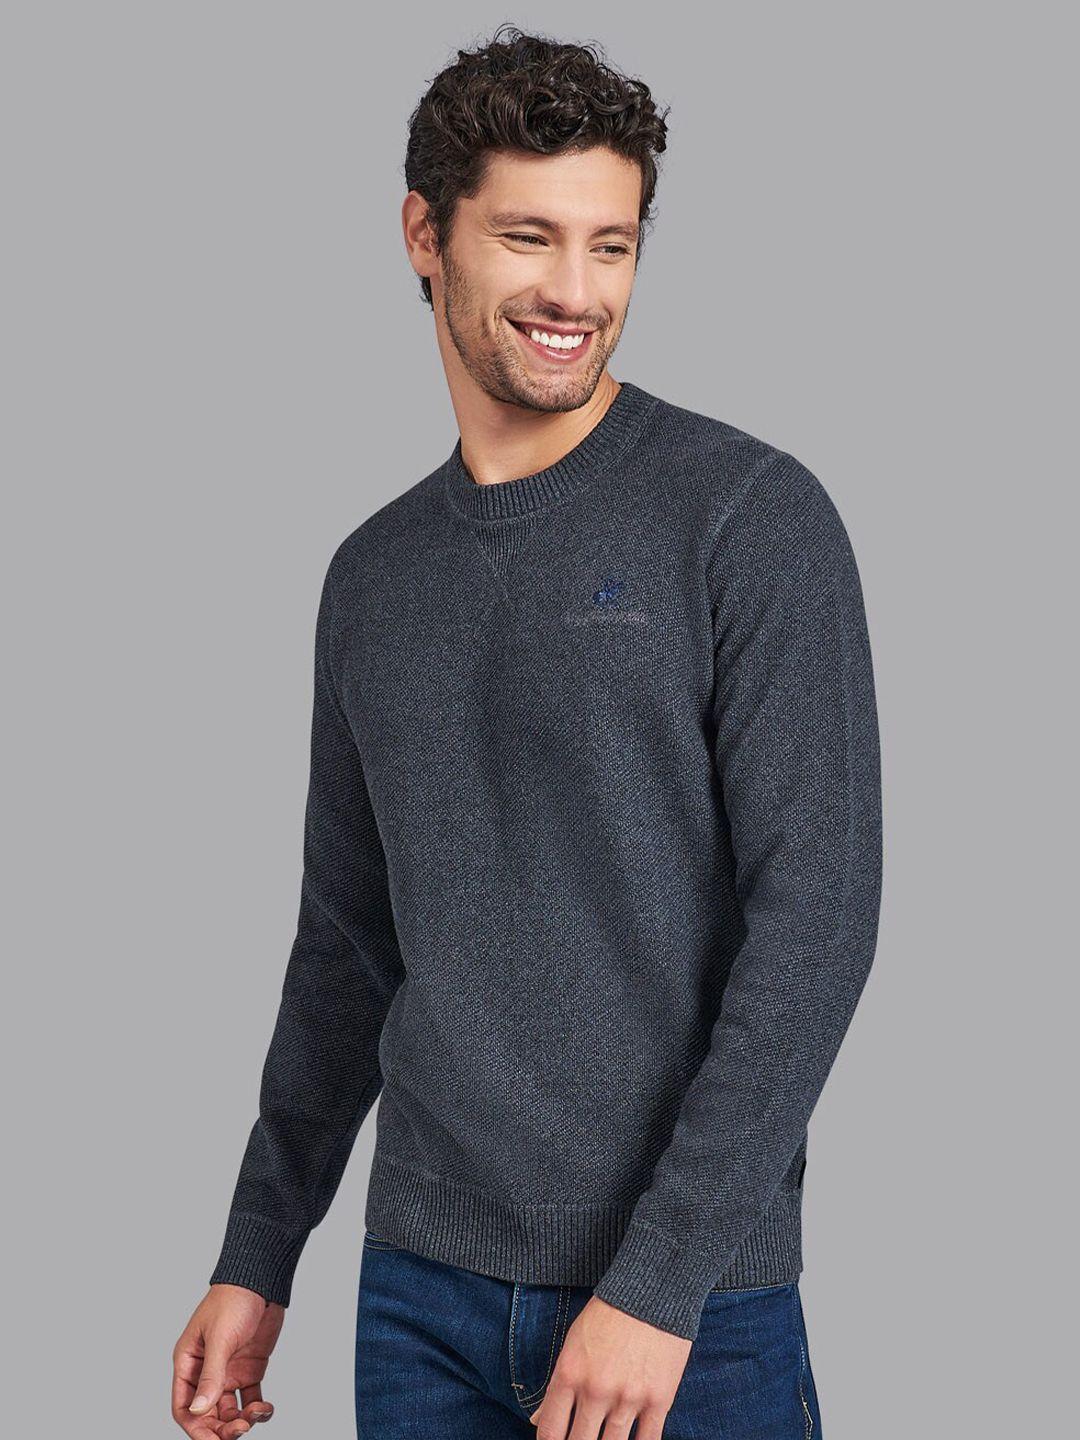 beverly-hills-polo-club-men-charcoal-cotton-pullover